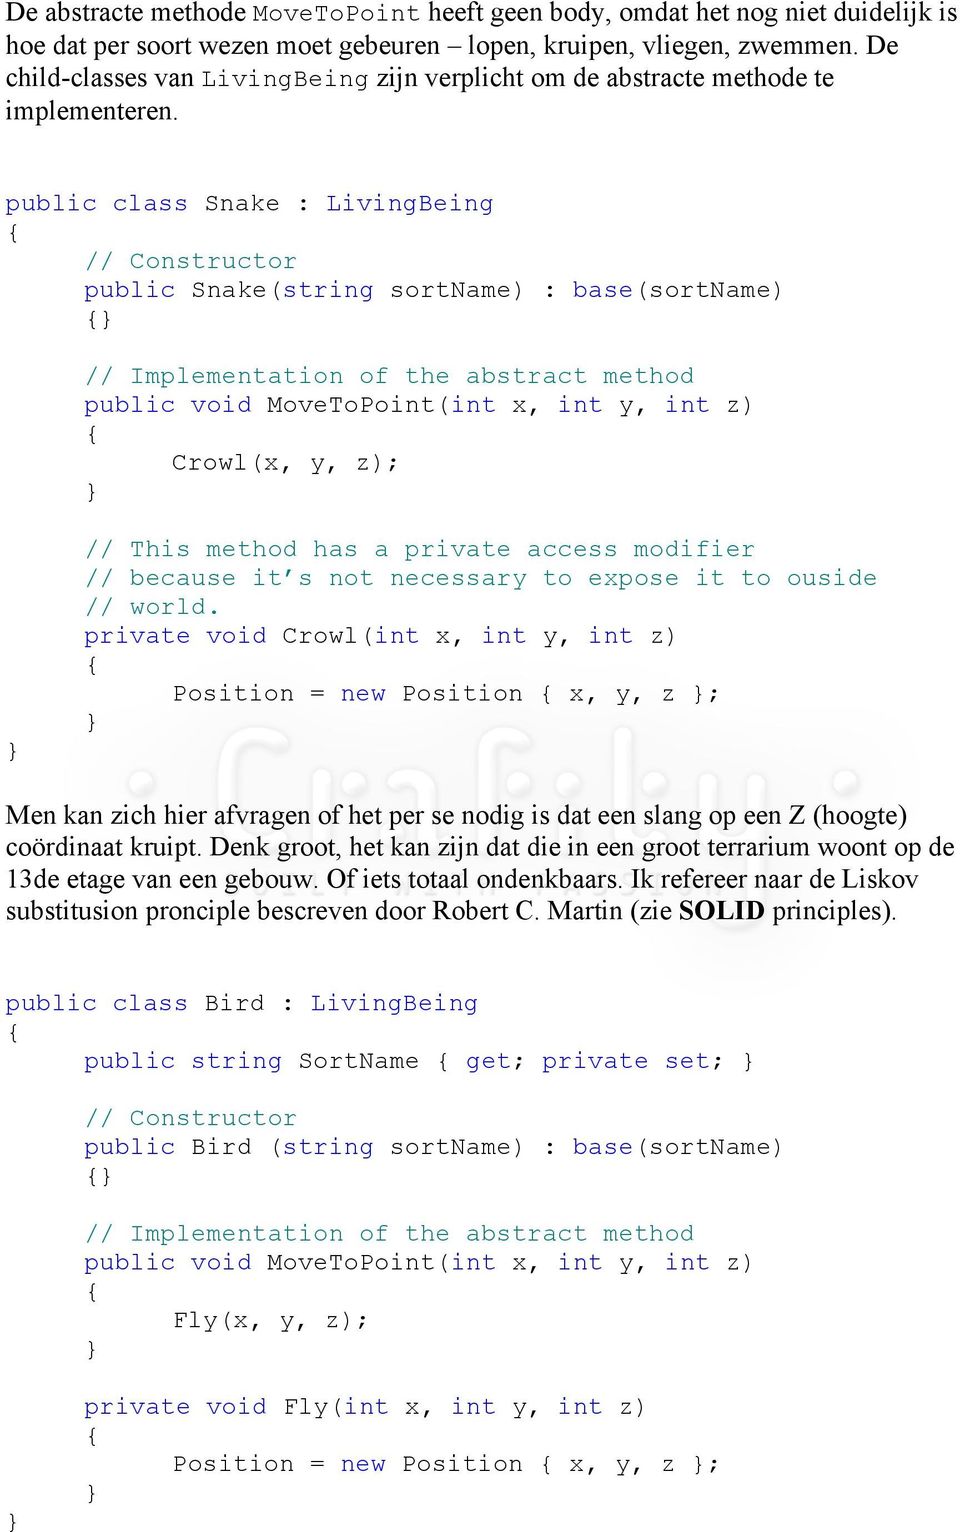 public class Snake : LivingBeing // Constructor public Snake(string sortname) : base(sortname) // Implementation of the abstract method public void MoveToPoint(int x, int y, int z) Crowl(x, y, z); //